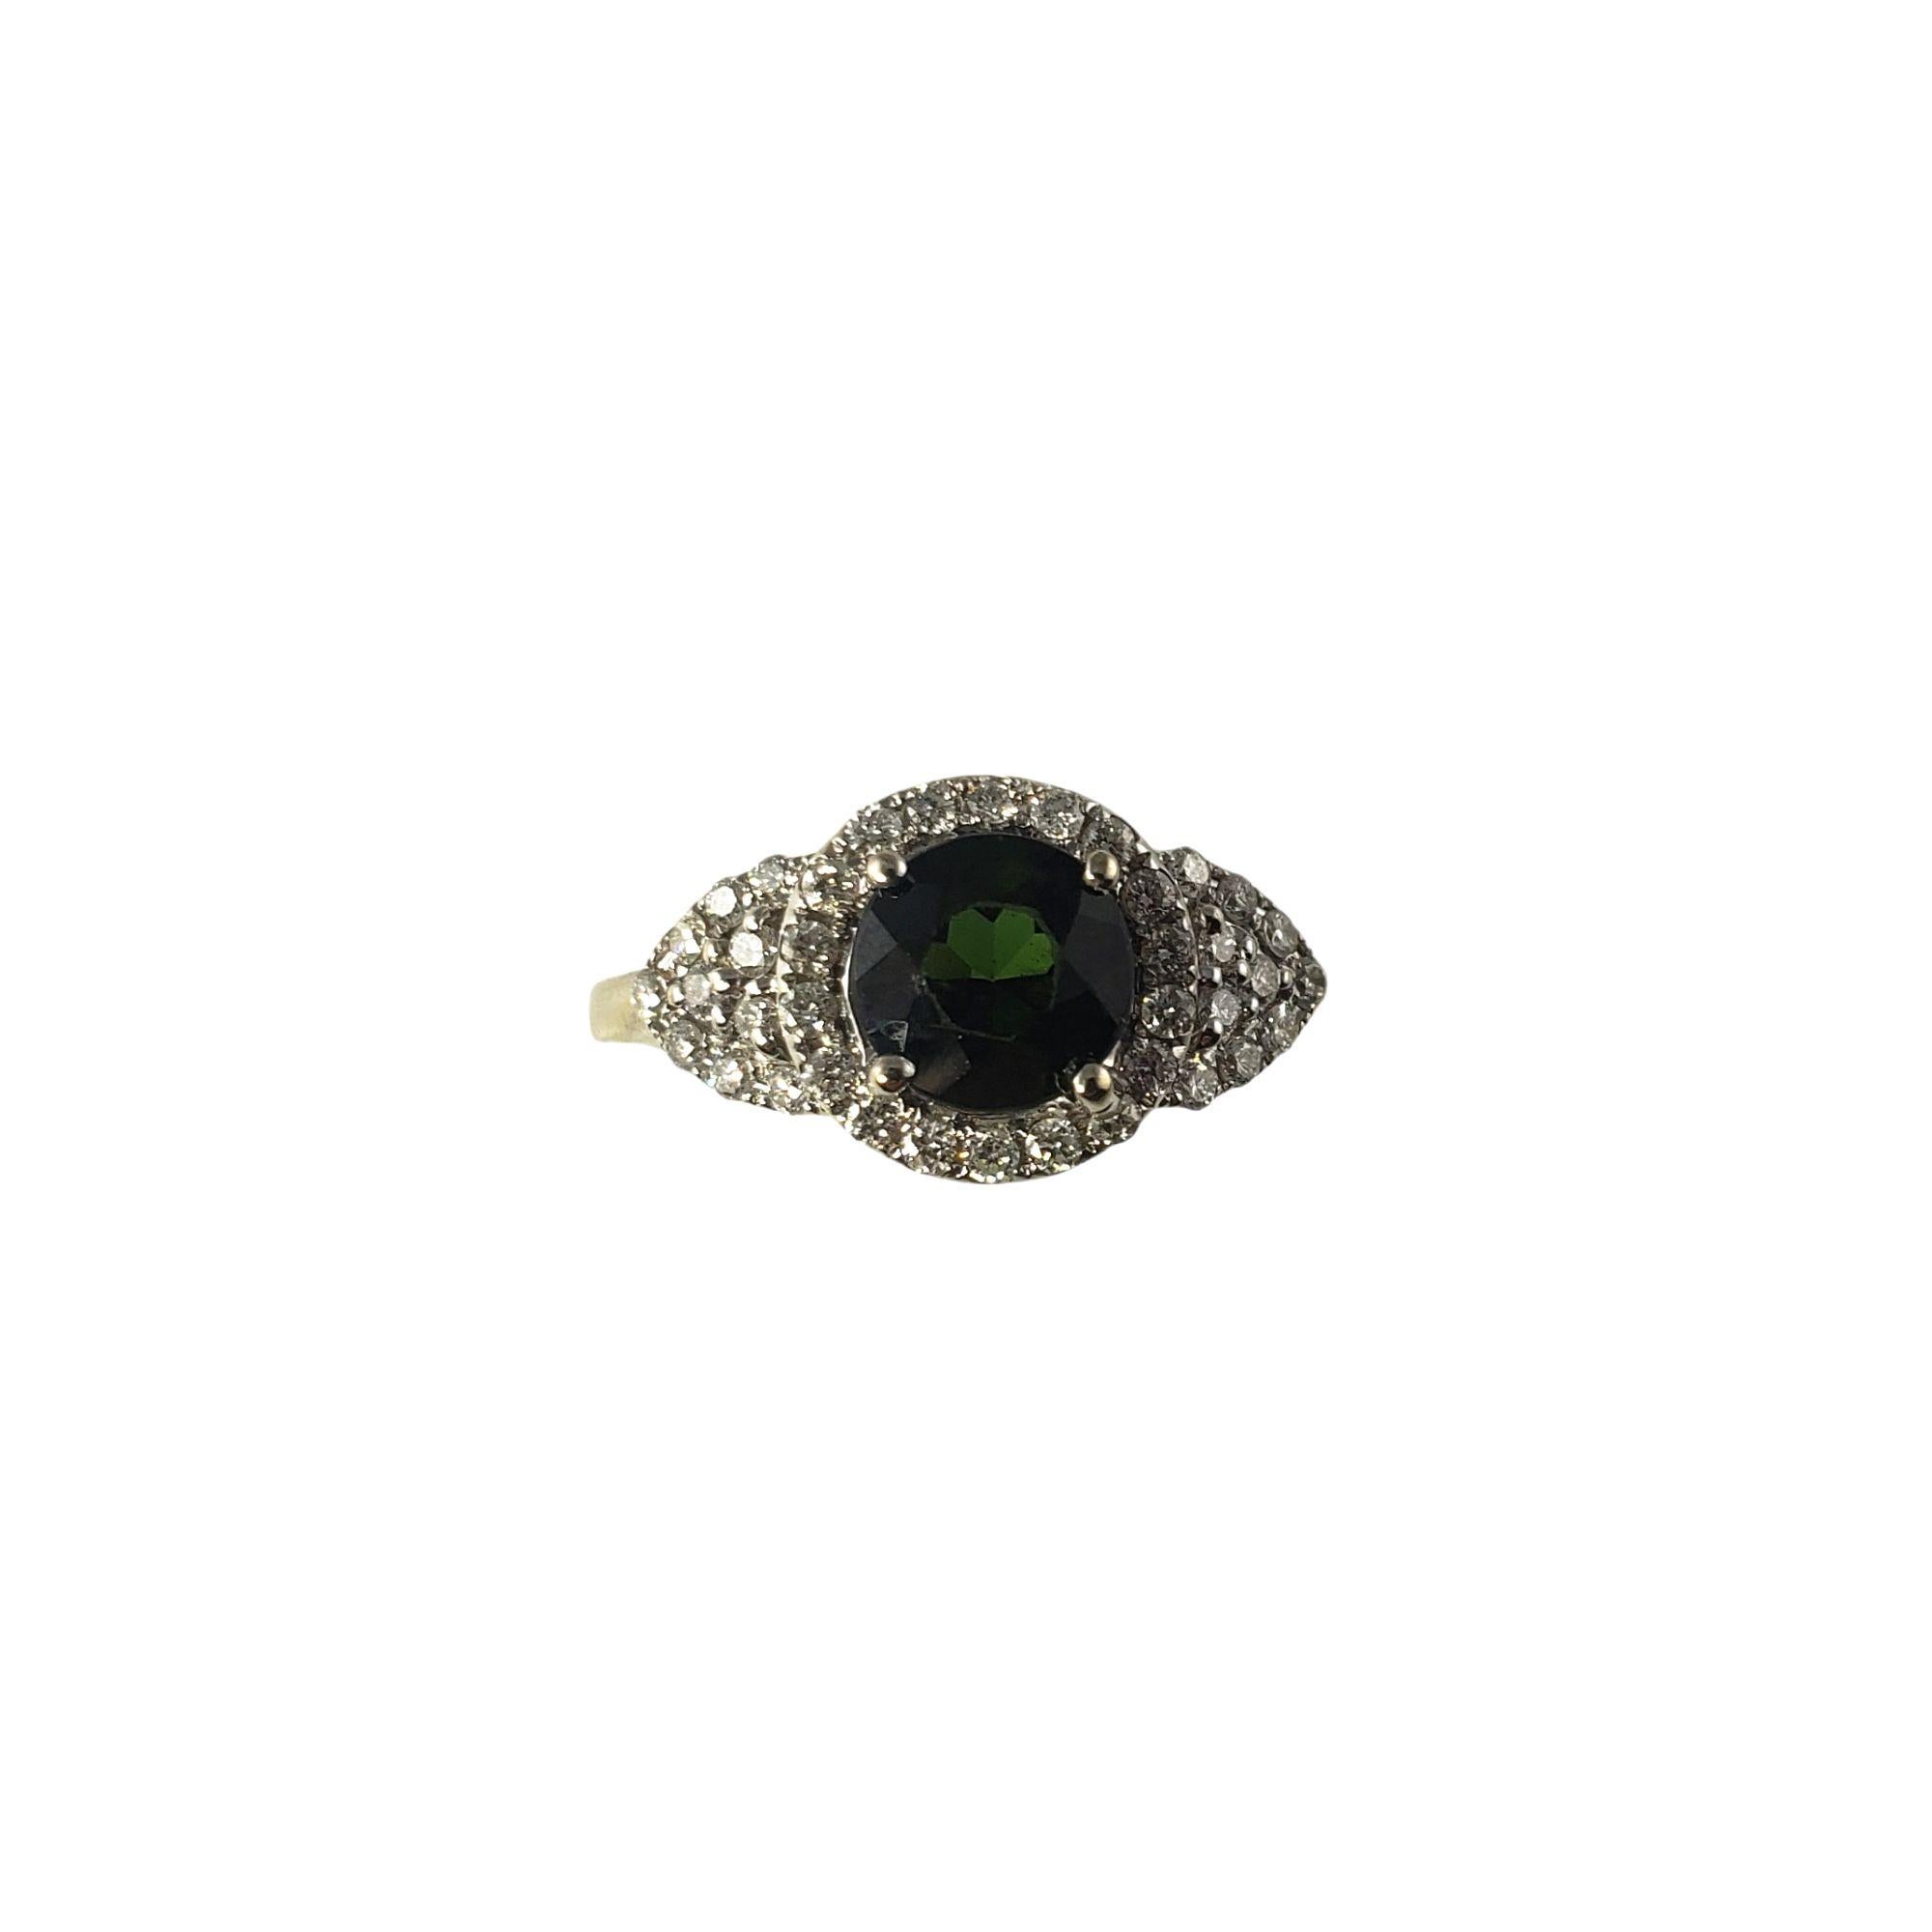 14 Karat White Gold and Tourmaline Ring Size 7.75 For Sale 1